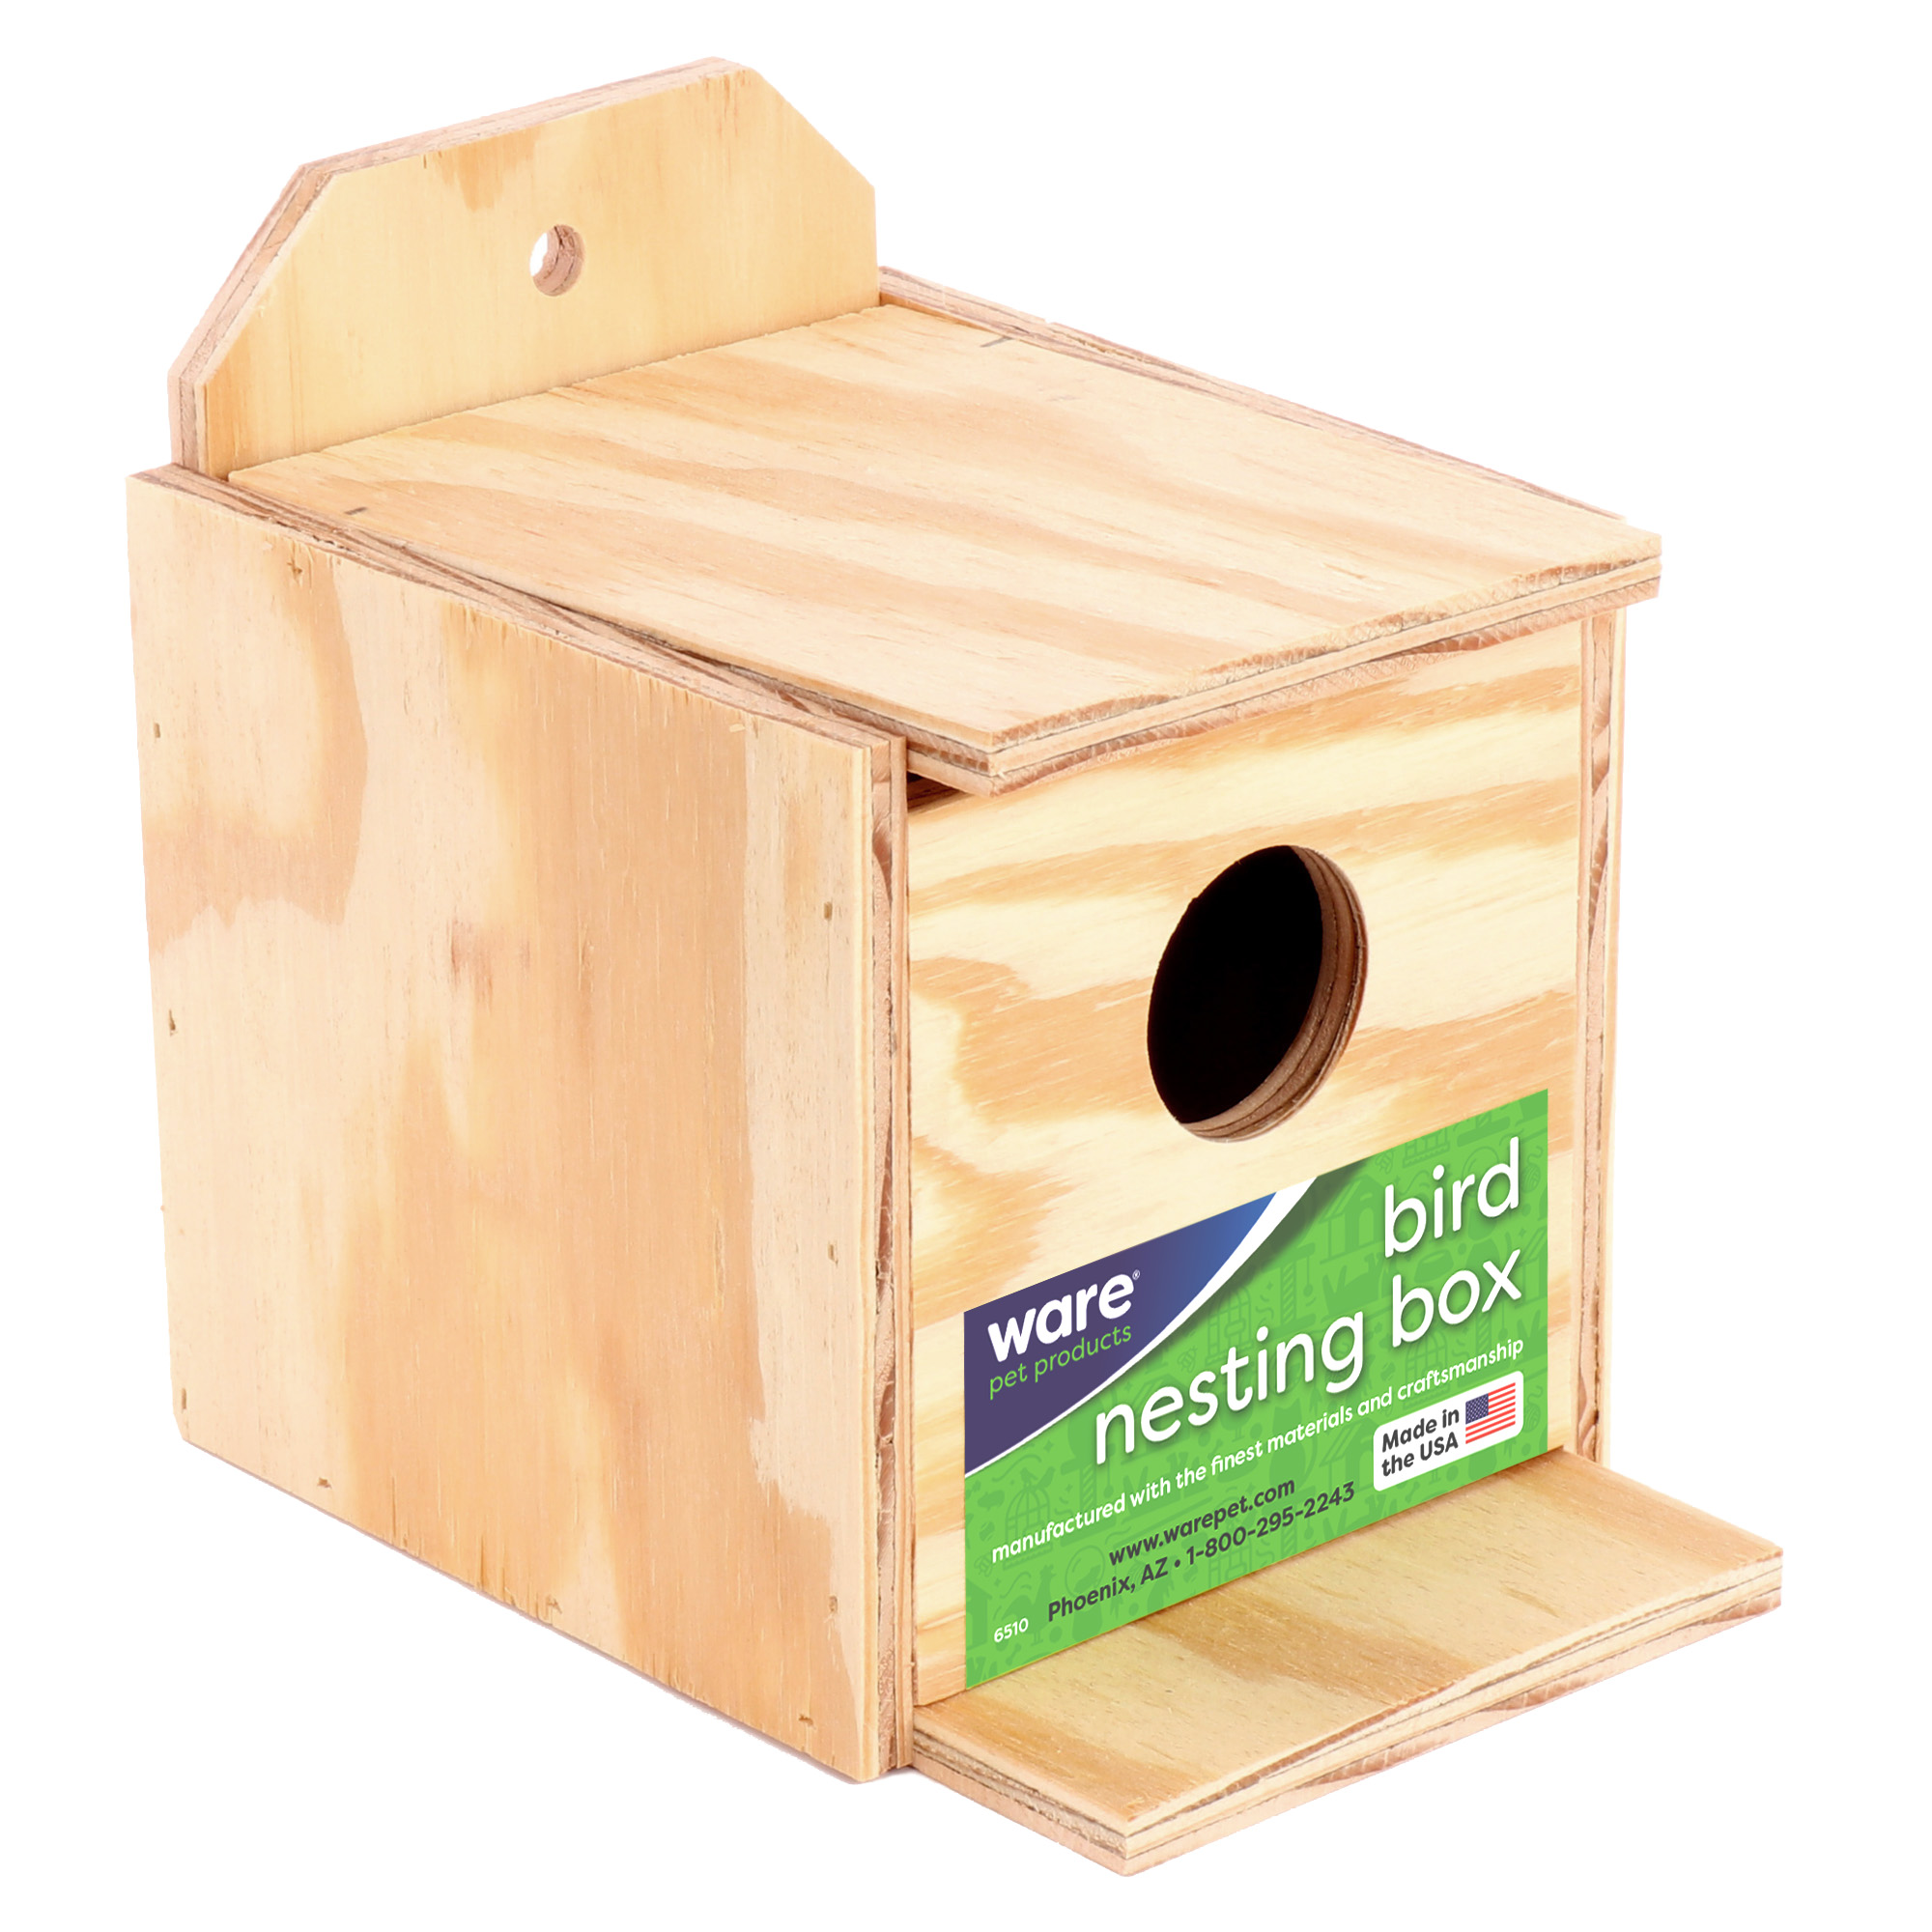 Nesting Material Raffia Grass Canary Finch Box Fillers Safe Decoration  Small Bird Pet House Multipurpose Soft Reusable sy Apply Gift Packing